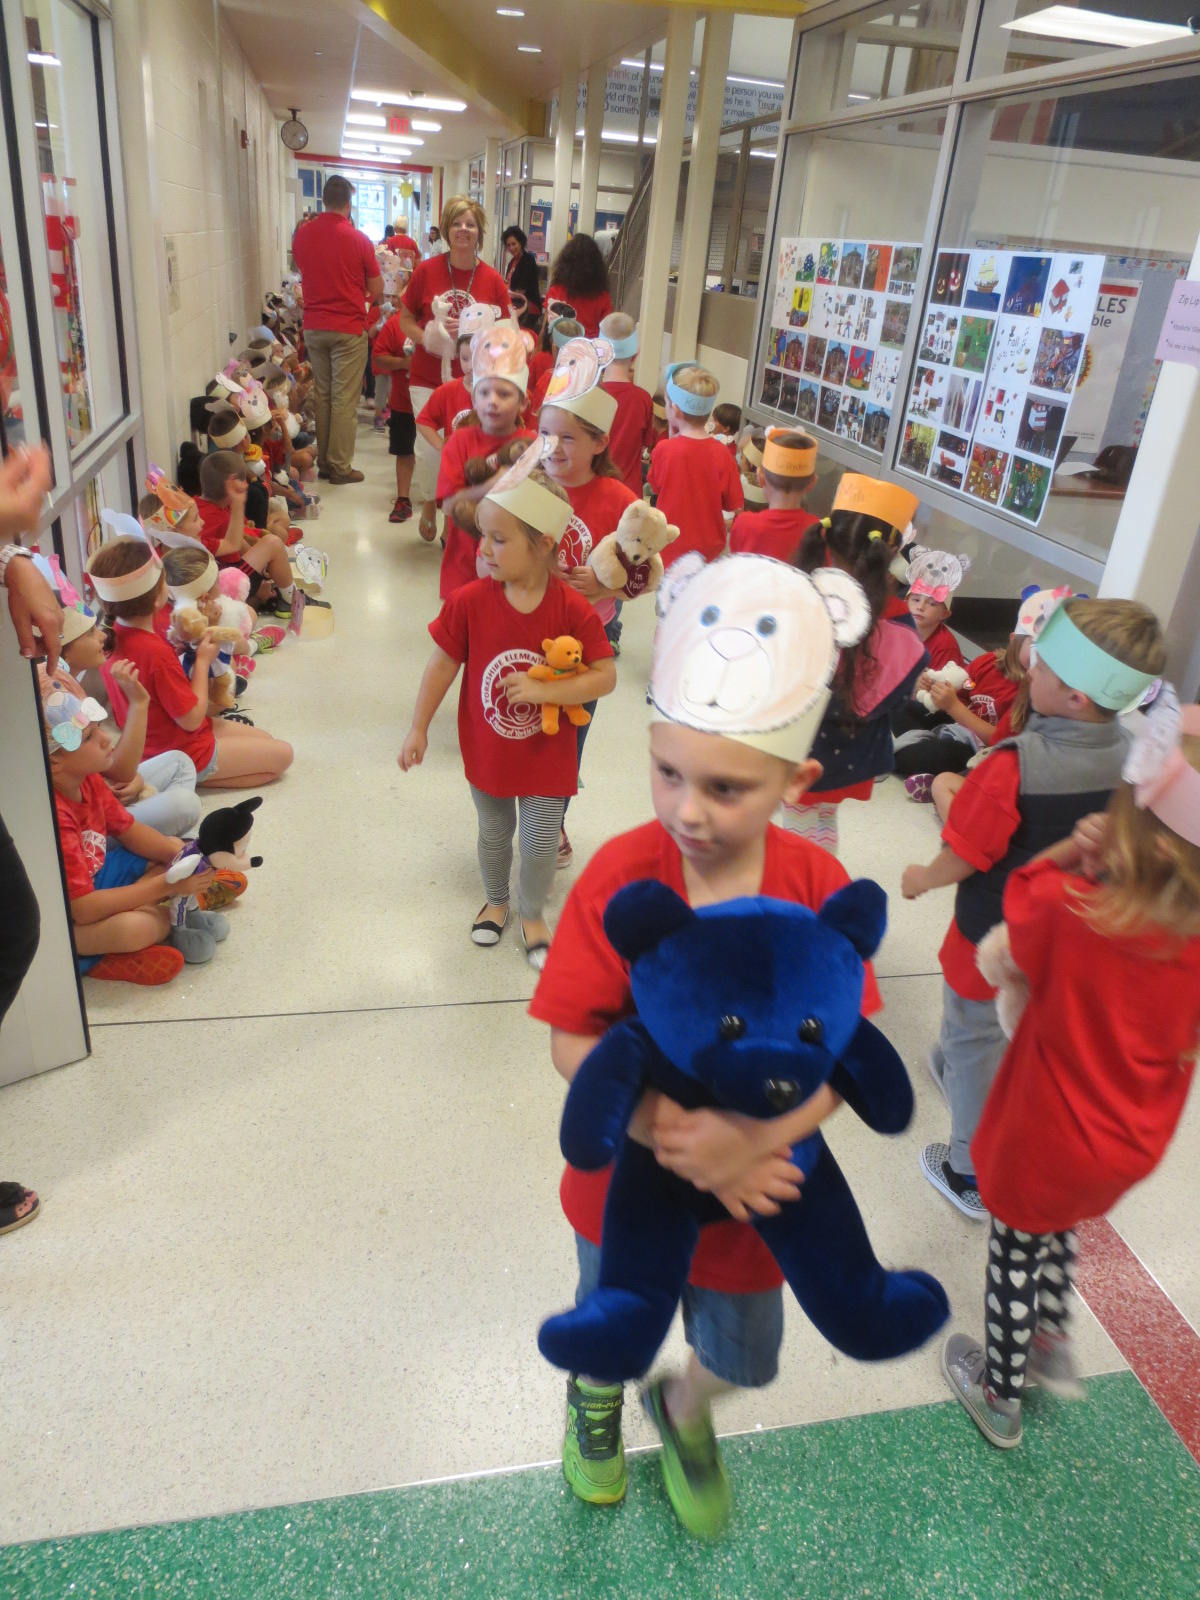 Teddy Bears on Parade at Yorkshire and Valley View